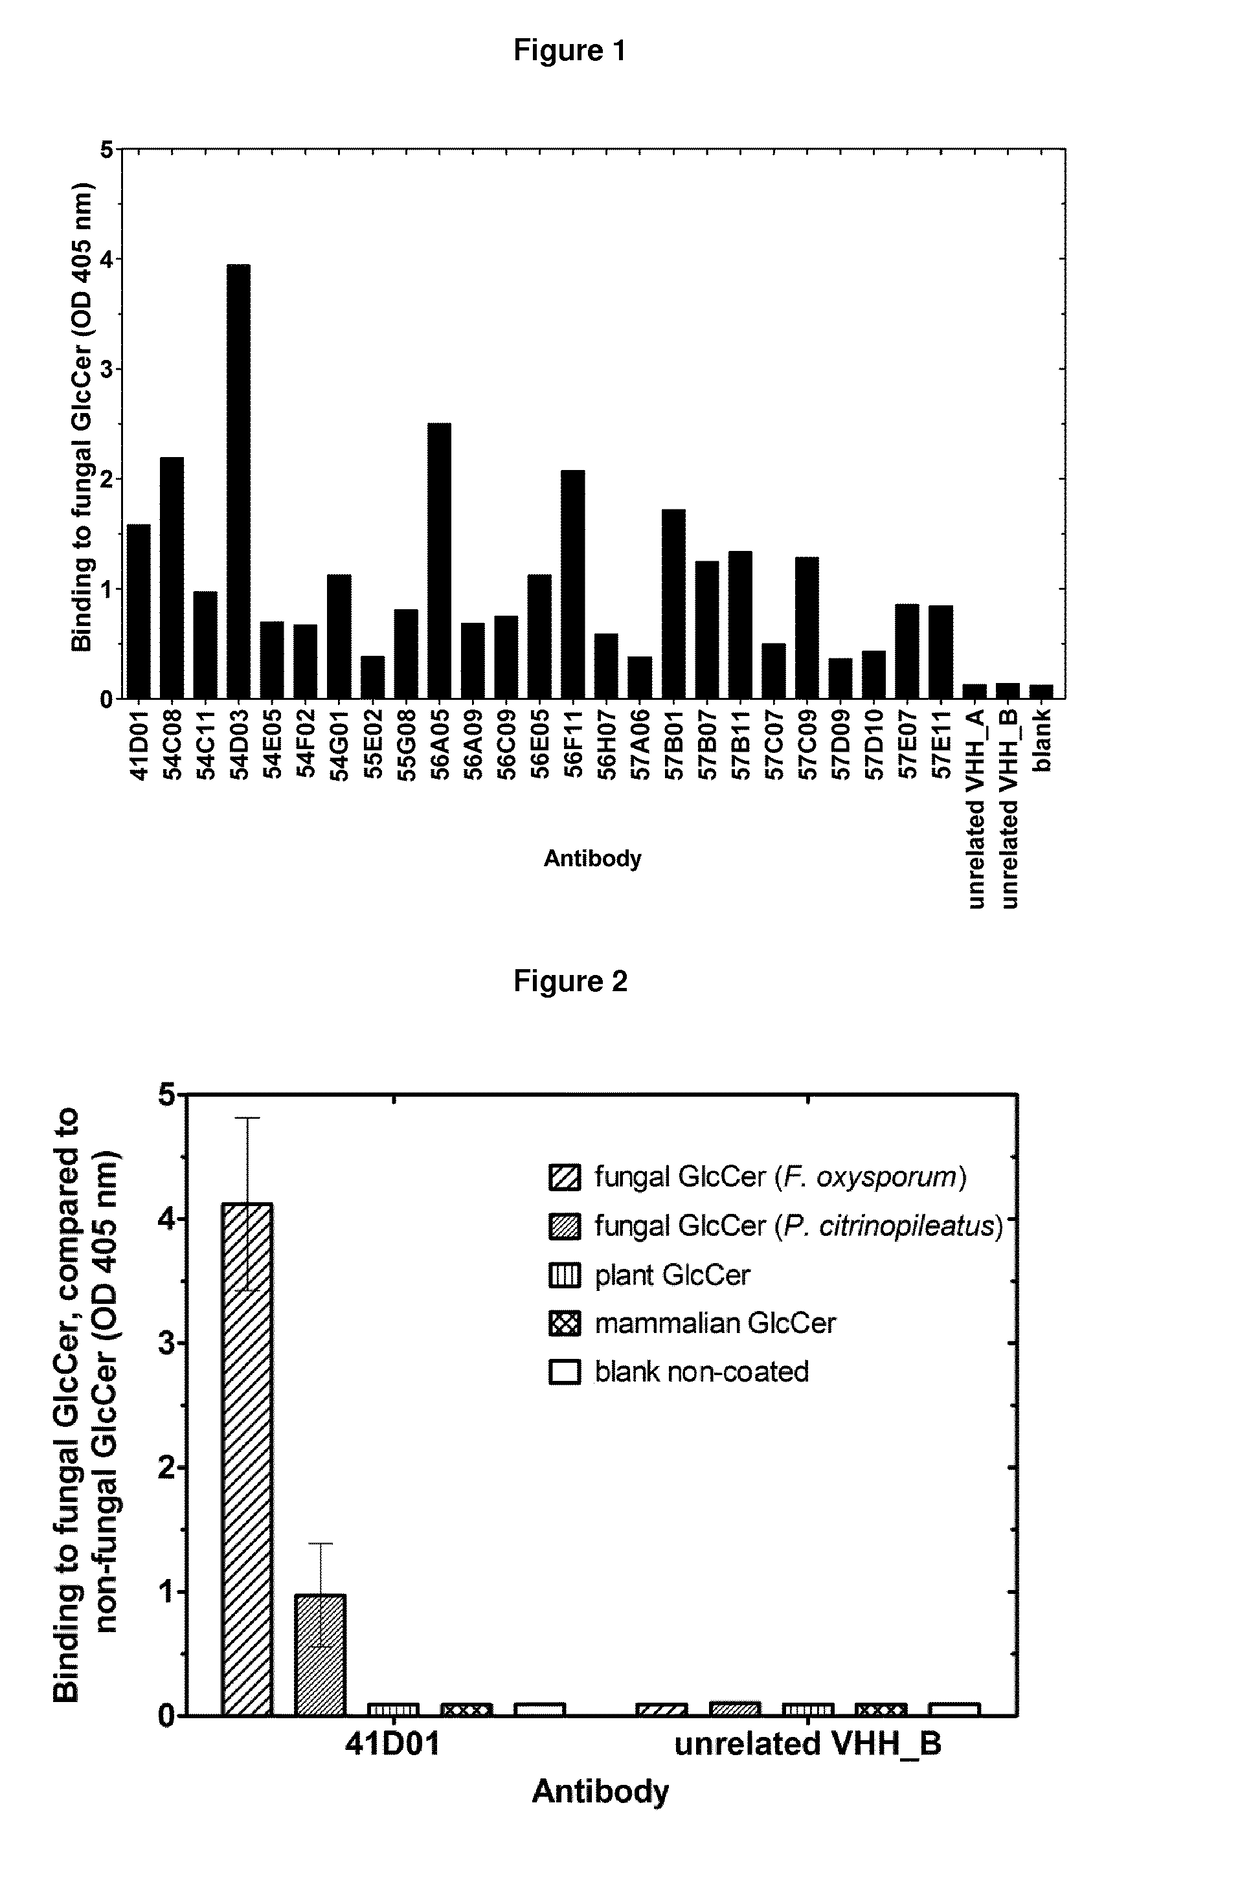 Agrochemical compositions comprising antibodies binding to sphingolipids